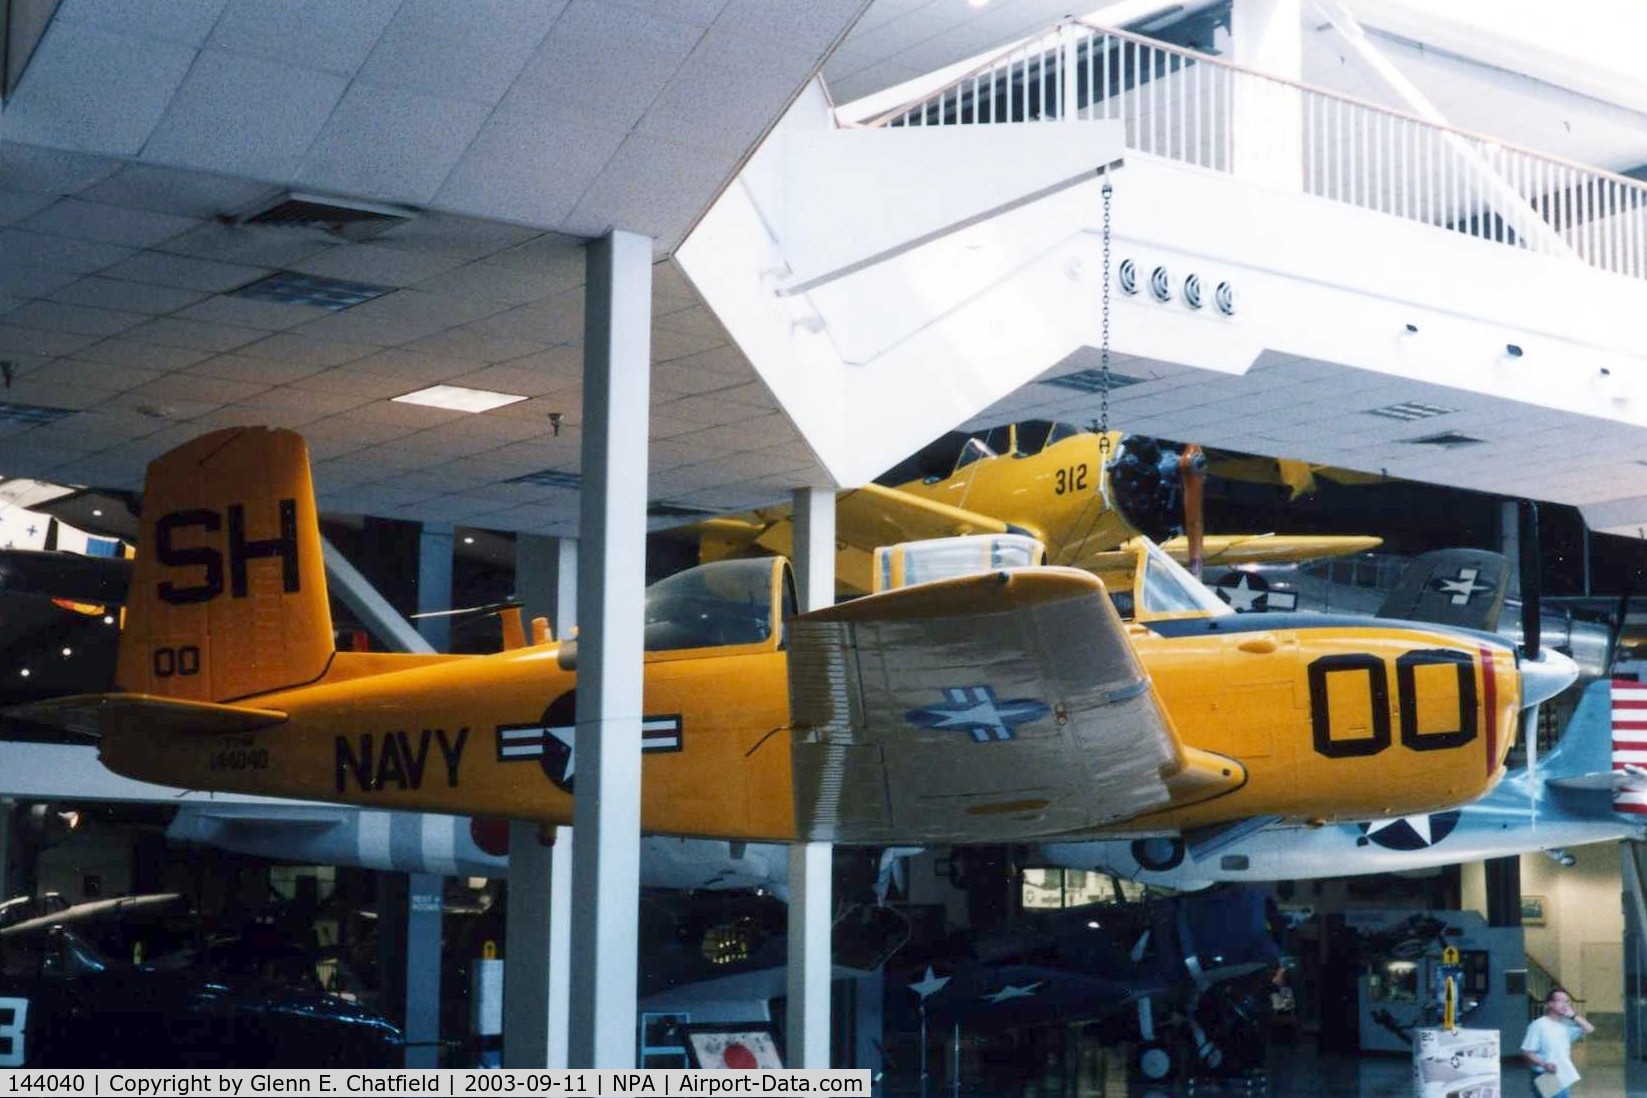 144040, Beech T-34B Mentor C/N BG-347, T-34B at the National Museum of Naval Aviation